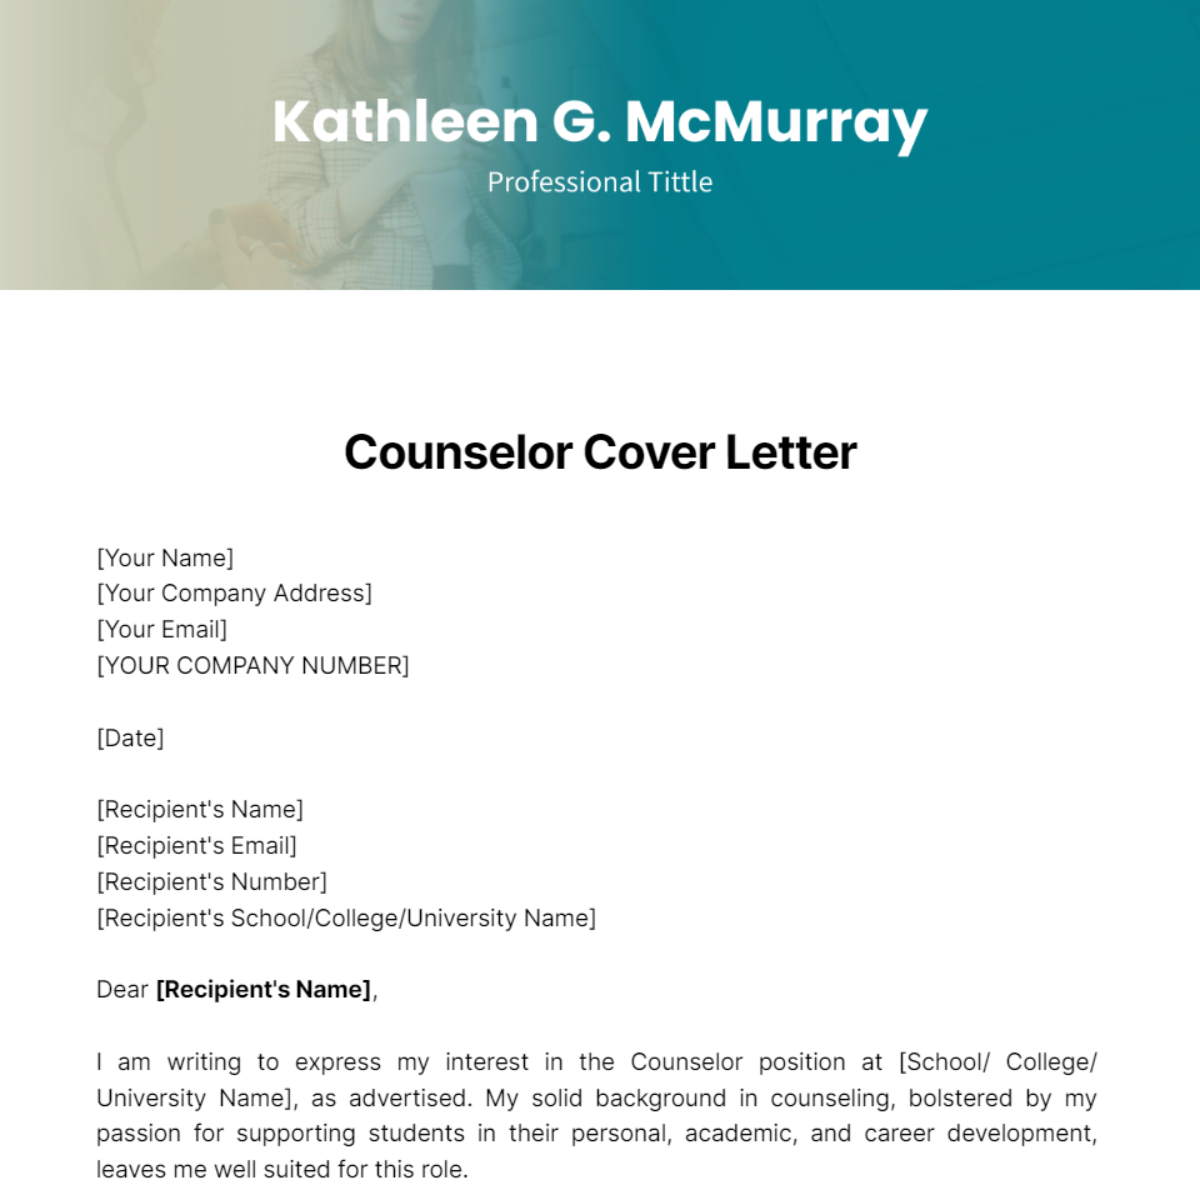 Counselor Cover Letter Template